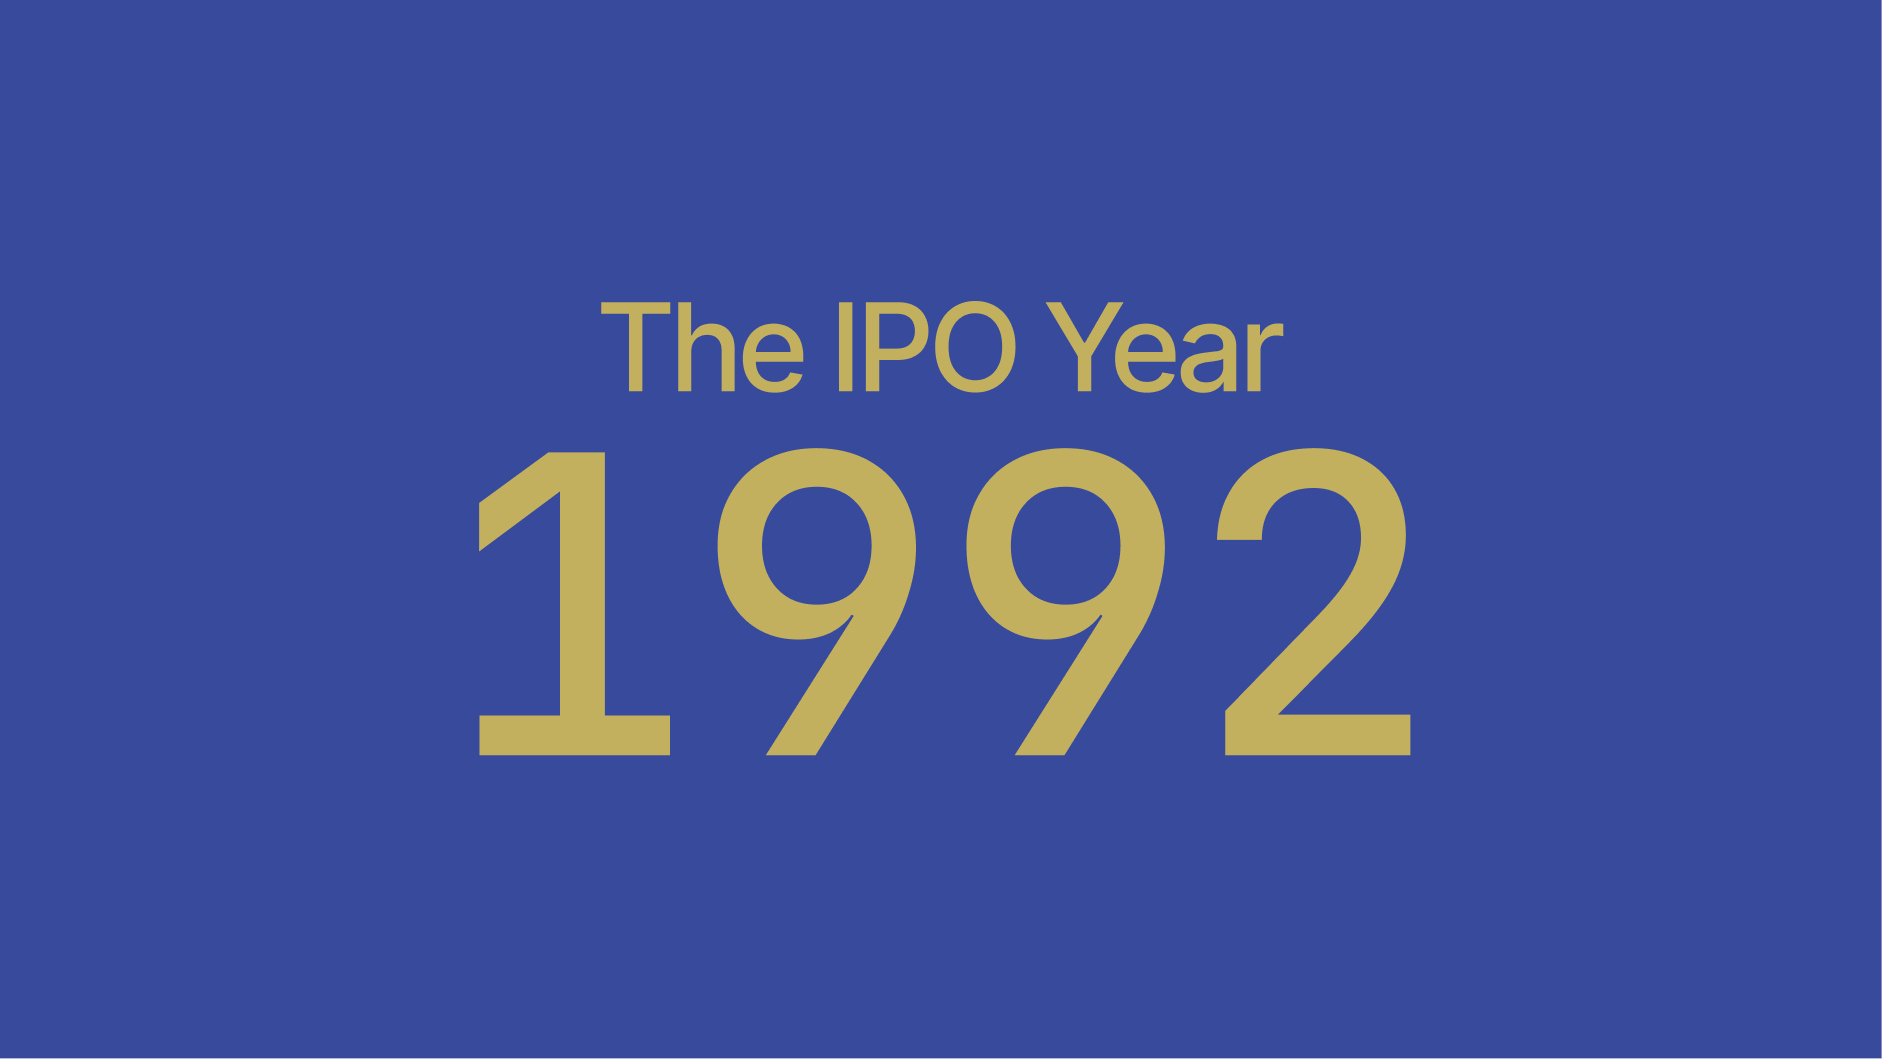 IPO's in 1992